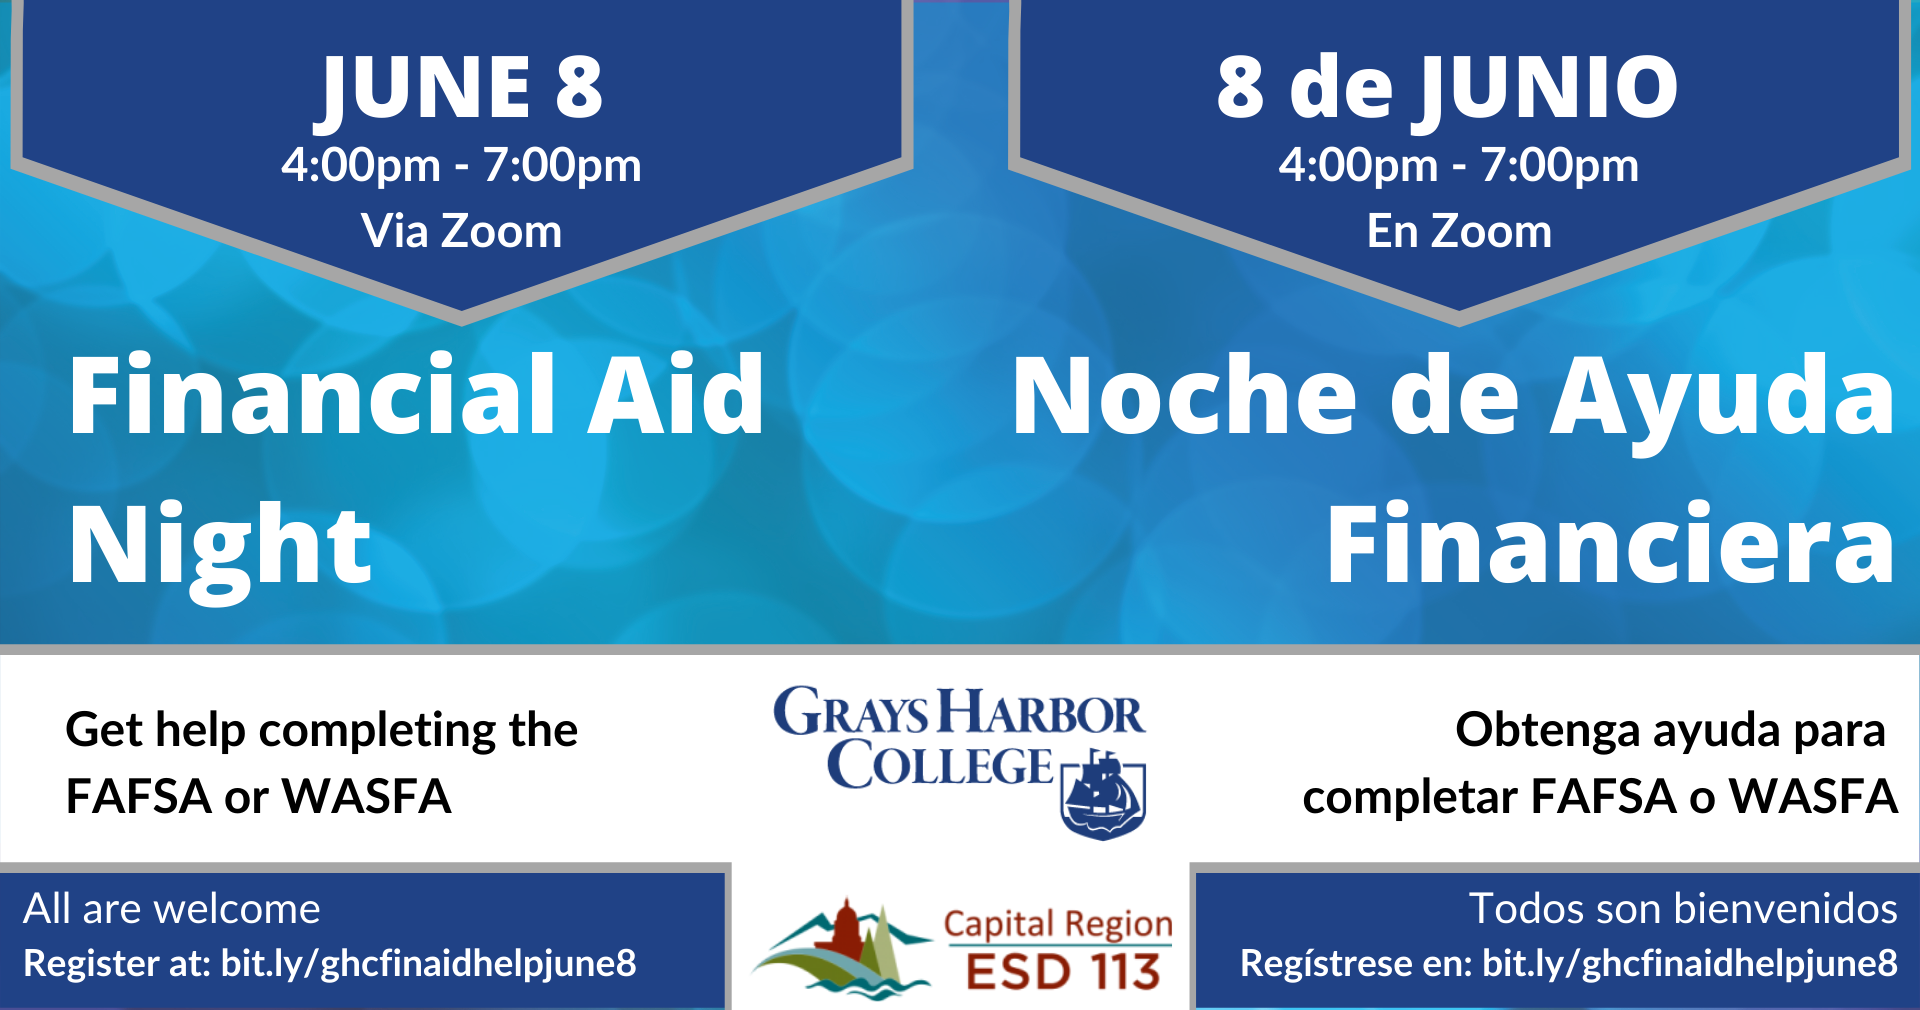 June 8 4:00pm - 7:00pm via Zoom. Get help completing the FAFSA or WASFA. All are welcome